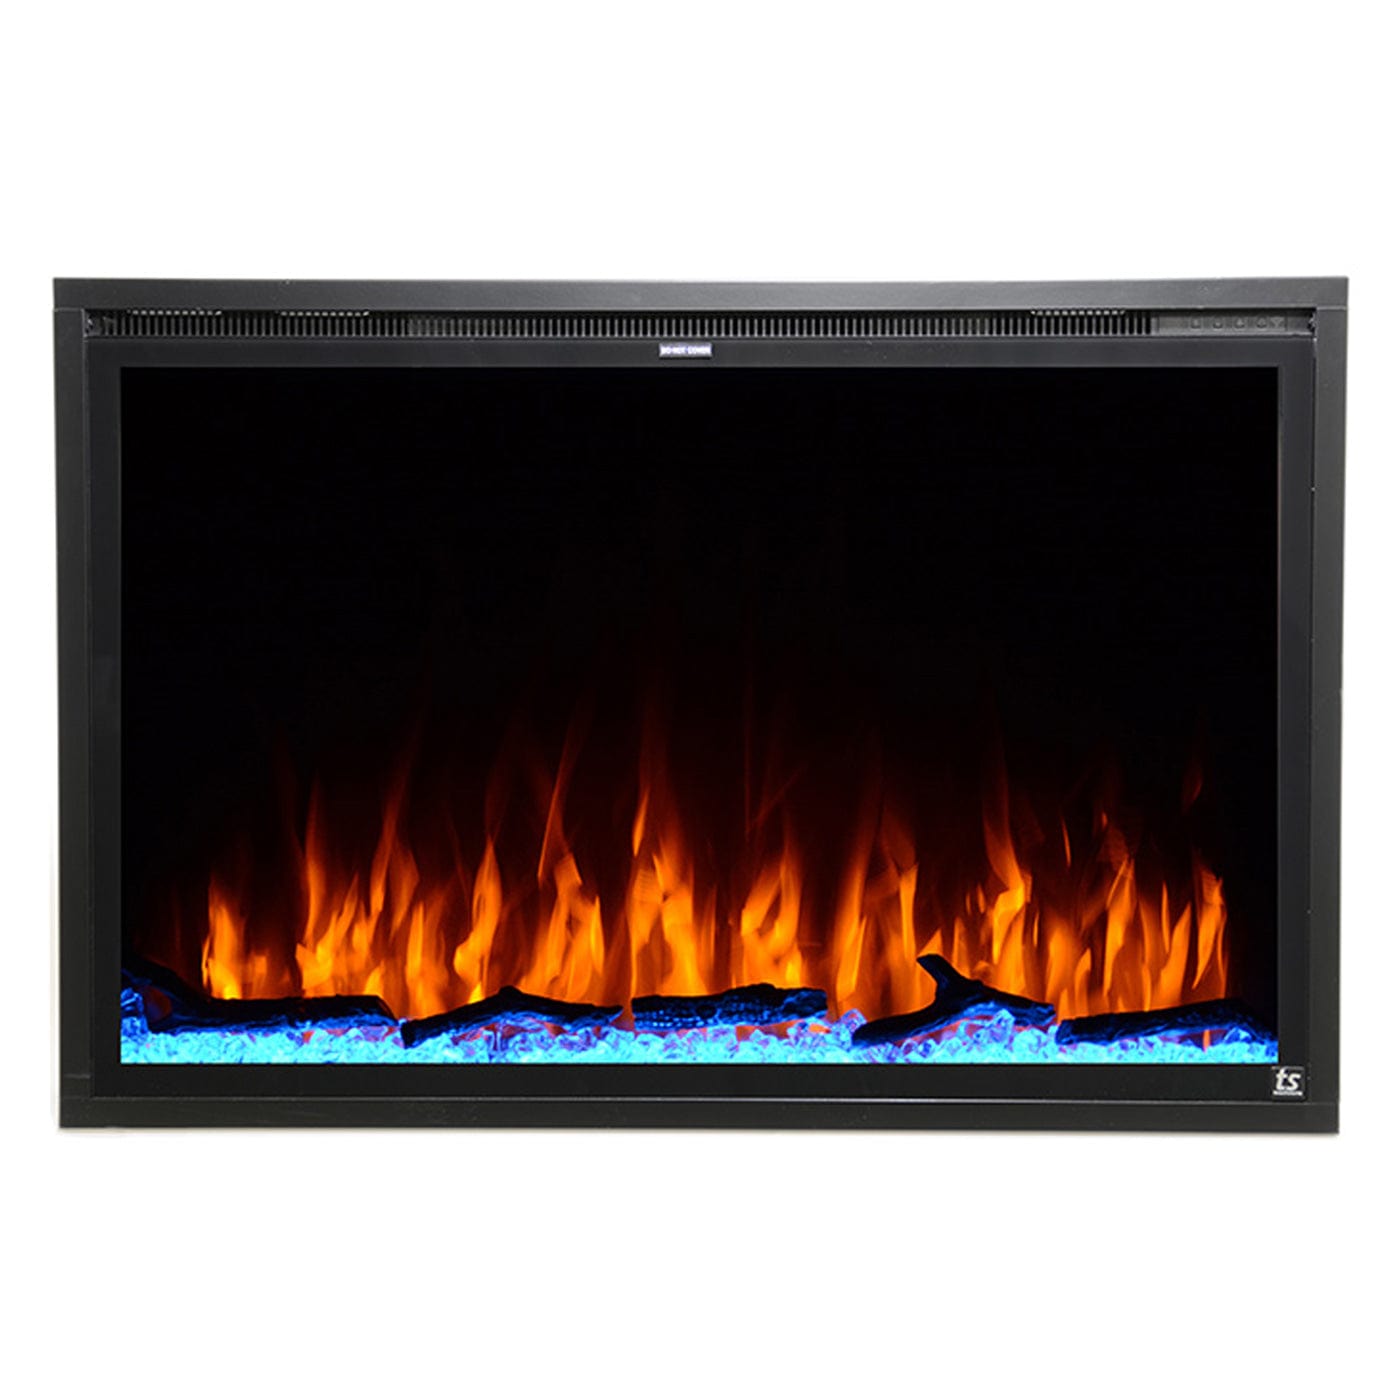 Touchstone Sideline Elite Forte 40 inch smart electric fireplace 80052 front view